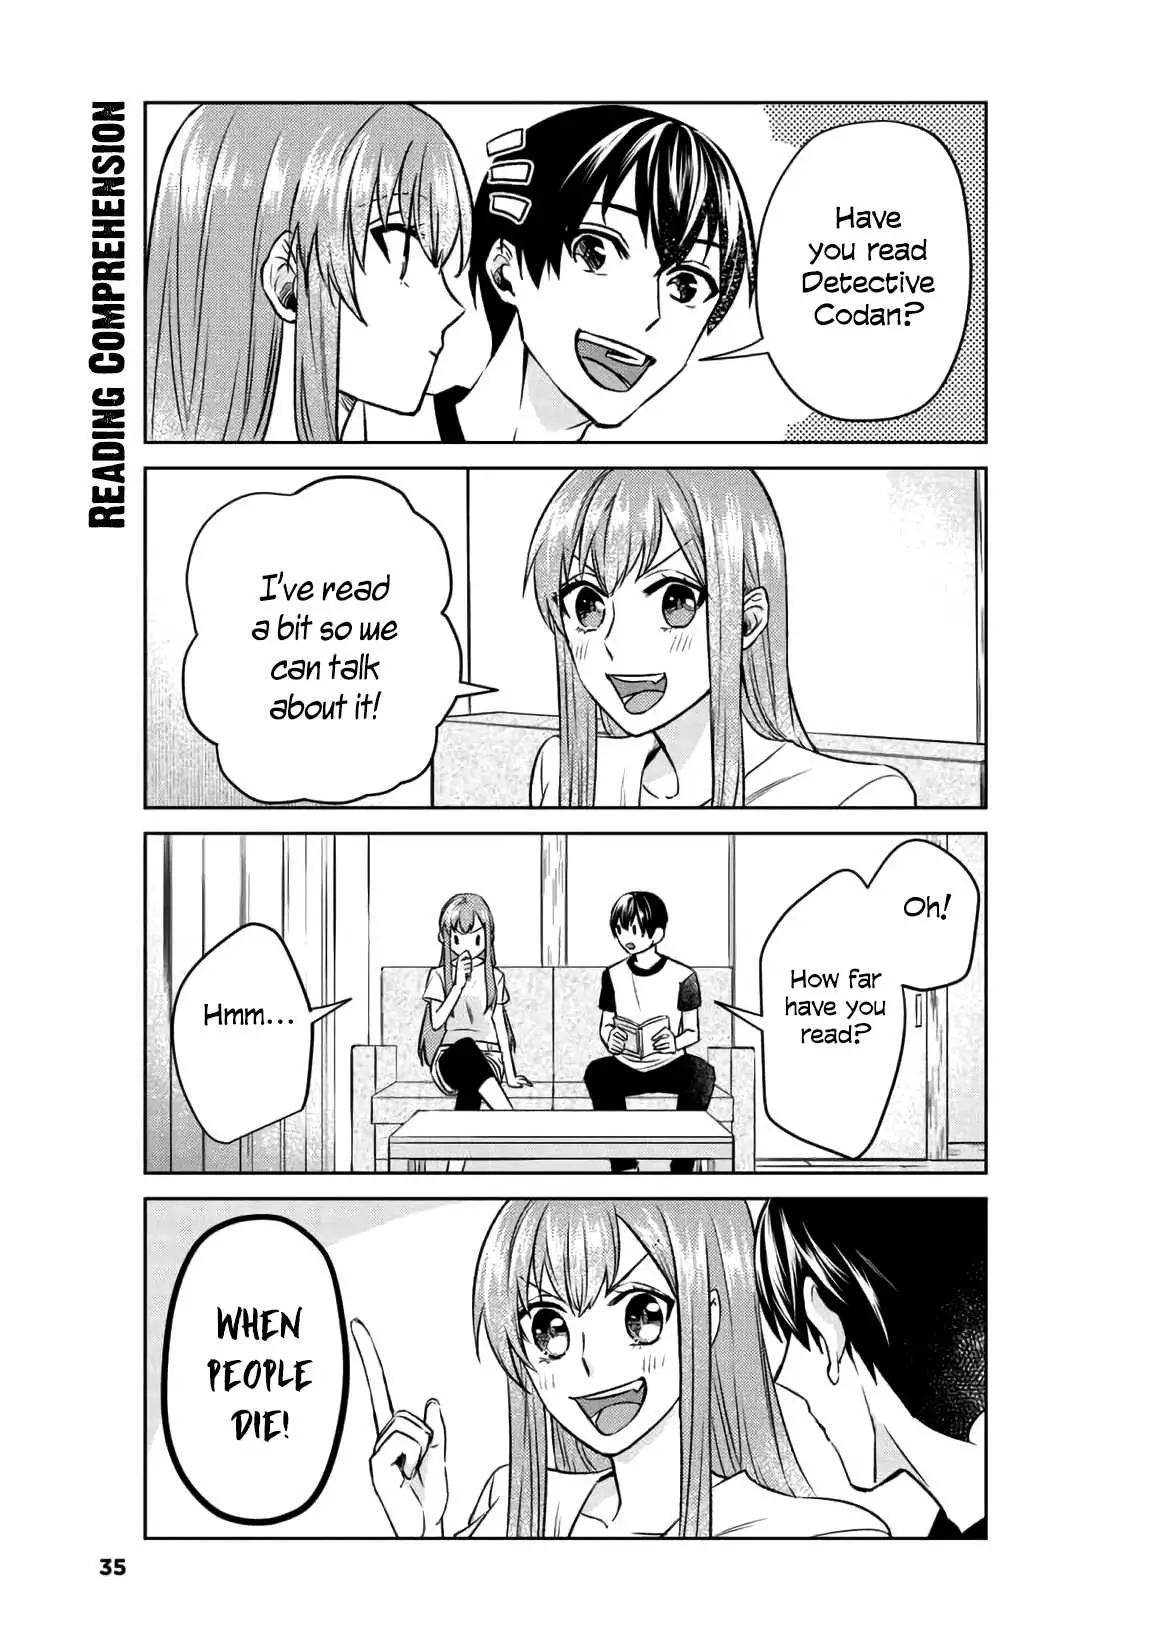 My Perfect Girlfriend! - 10 page 12-5ea3a75b